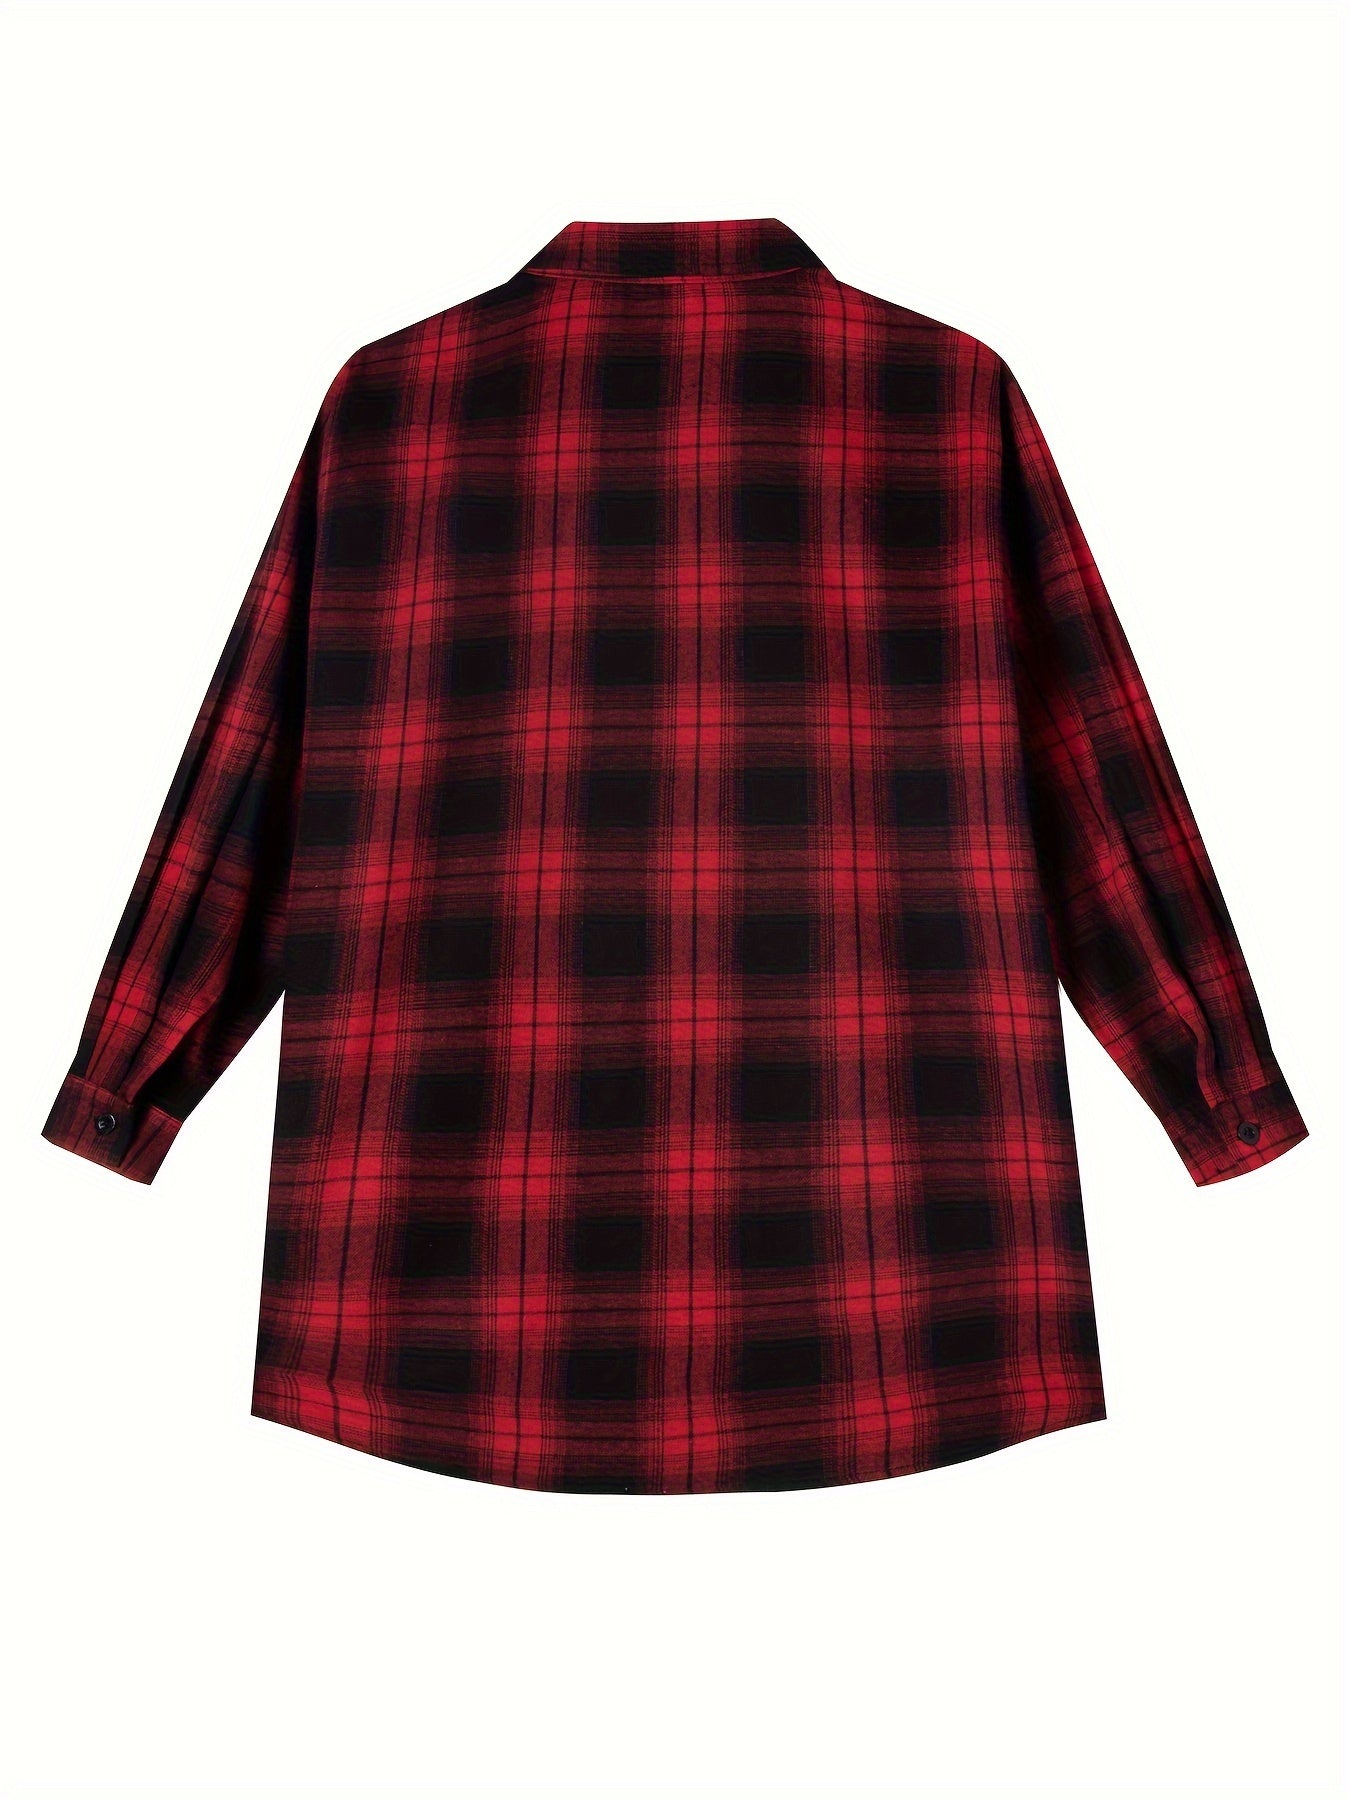 Plus Size Casual Blouse, Women's Plus Plaid Print Button Up Long Sleeve Turn Down Collar Shacket